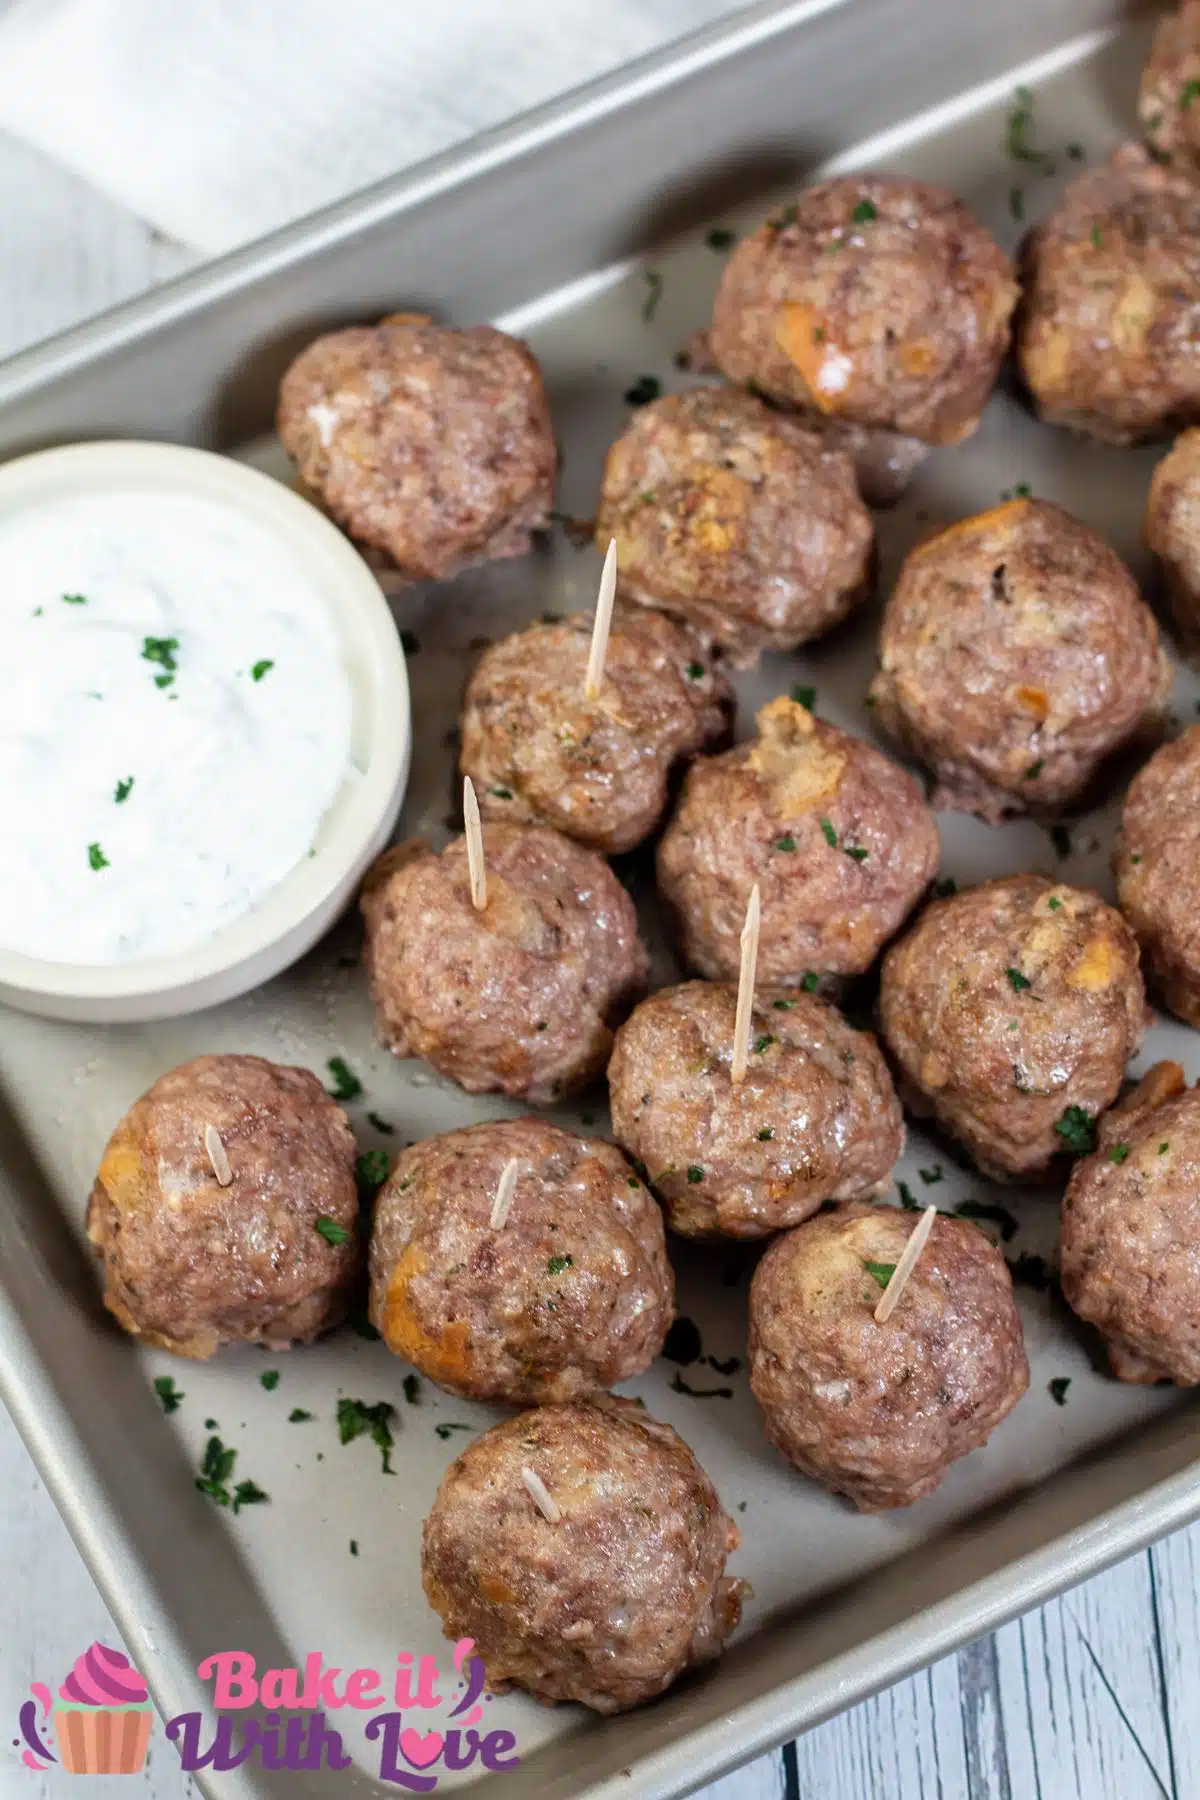 Tall image showing lamb meatballs on a metal tray with dipping sauce.